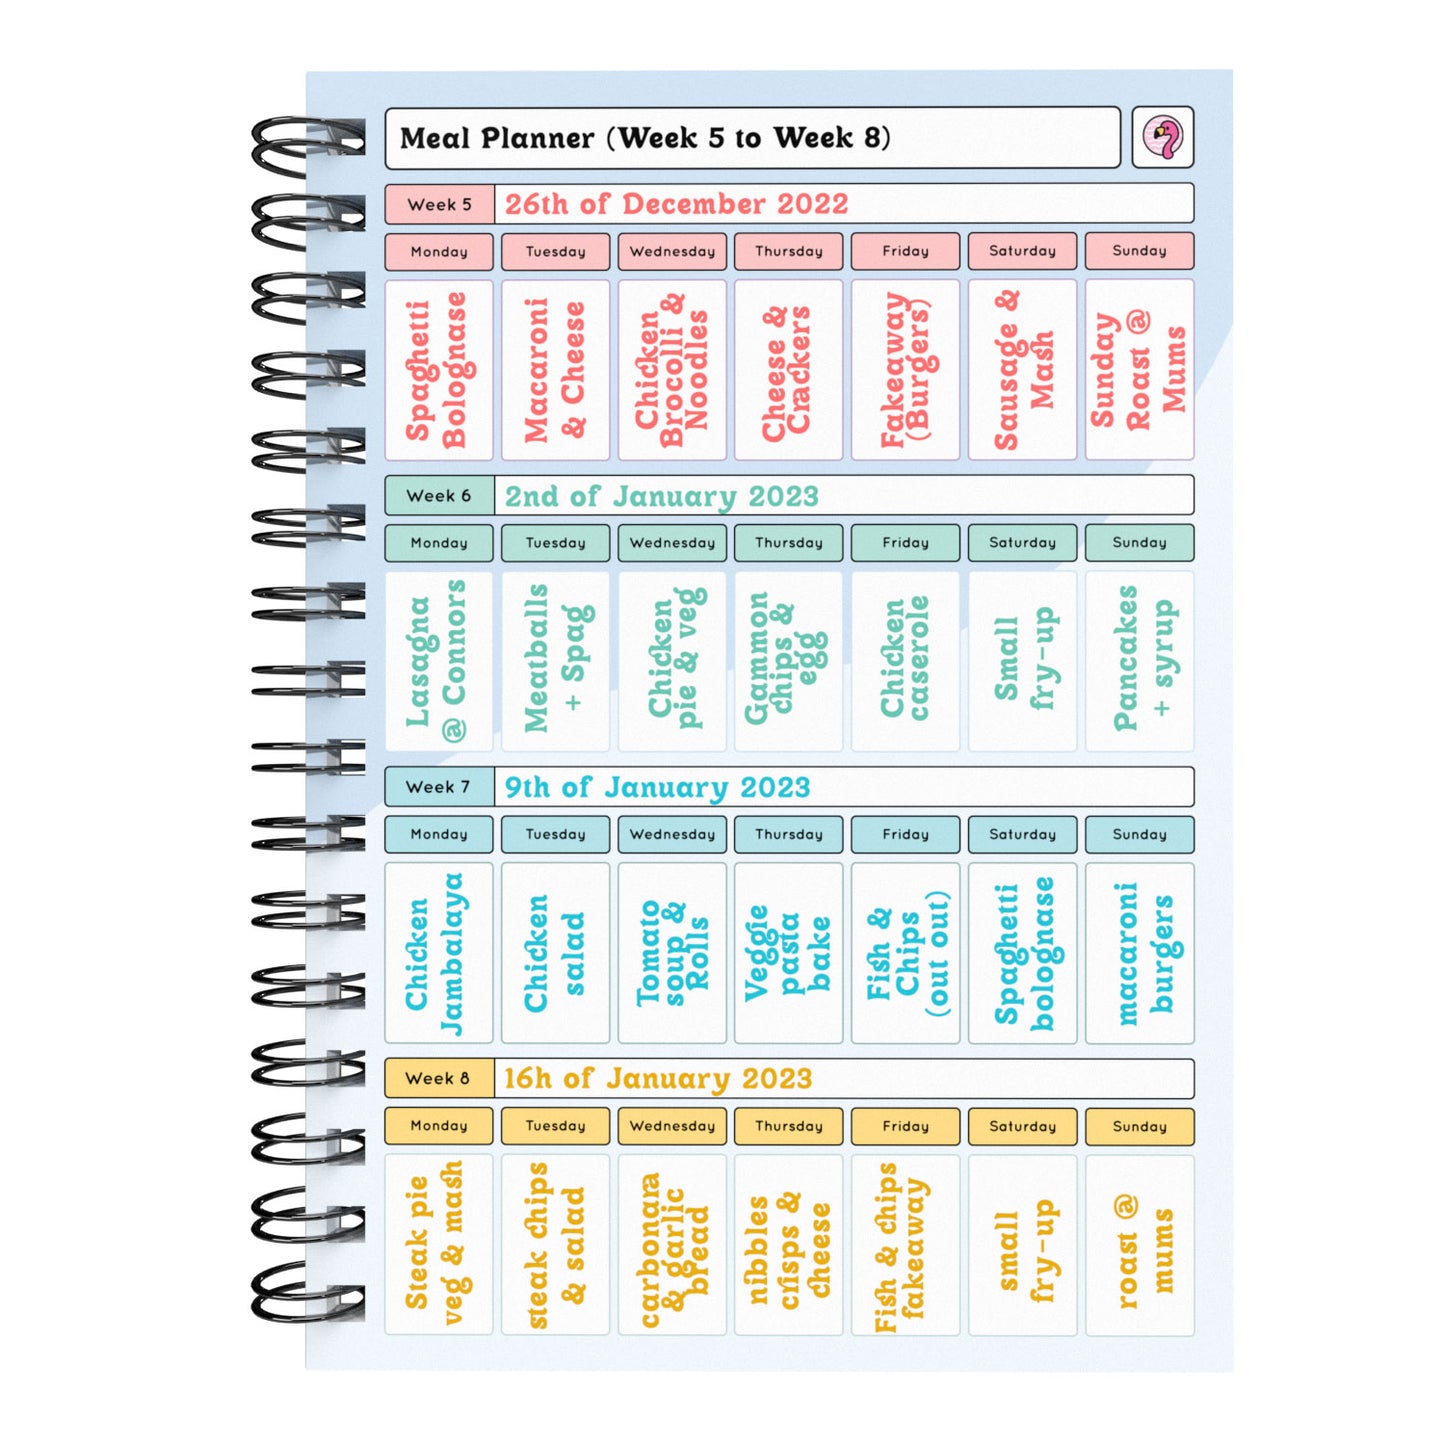 Food Diary - C42 - Calorie Counting